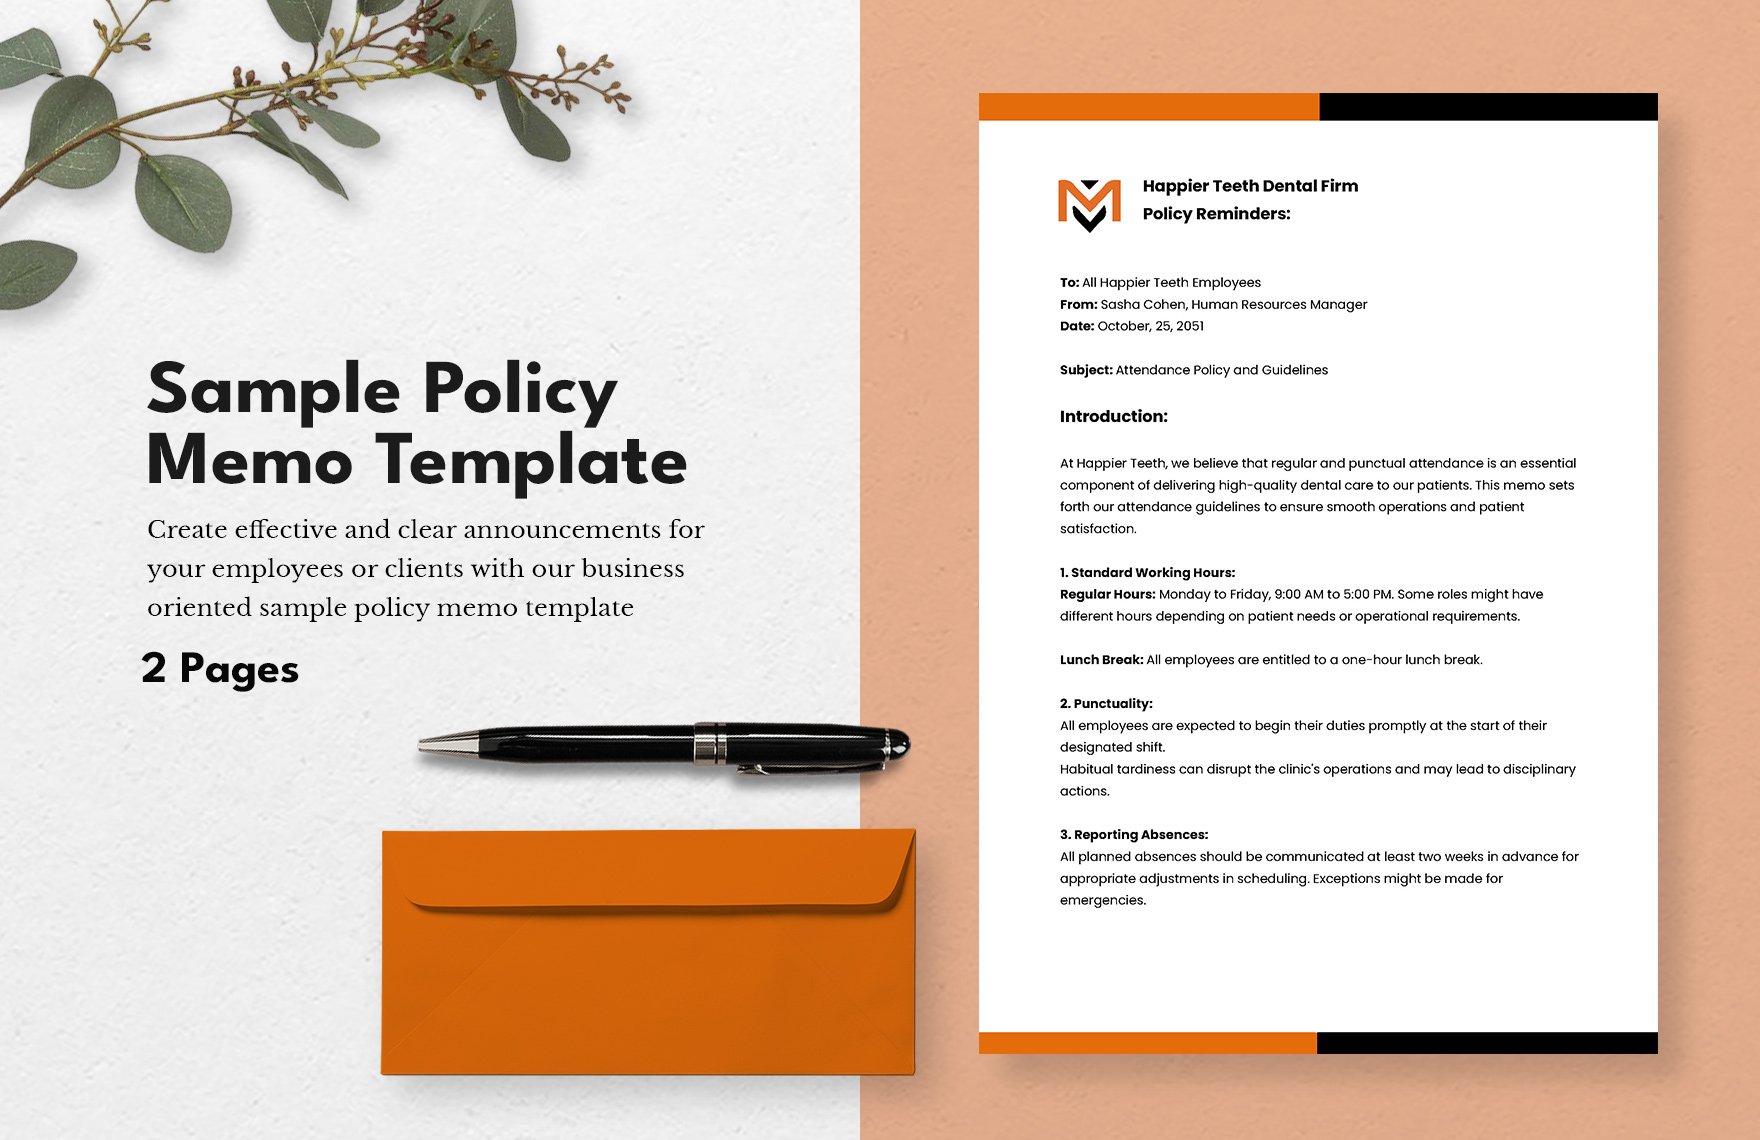 Sample Policy Memo Template